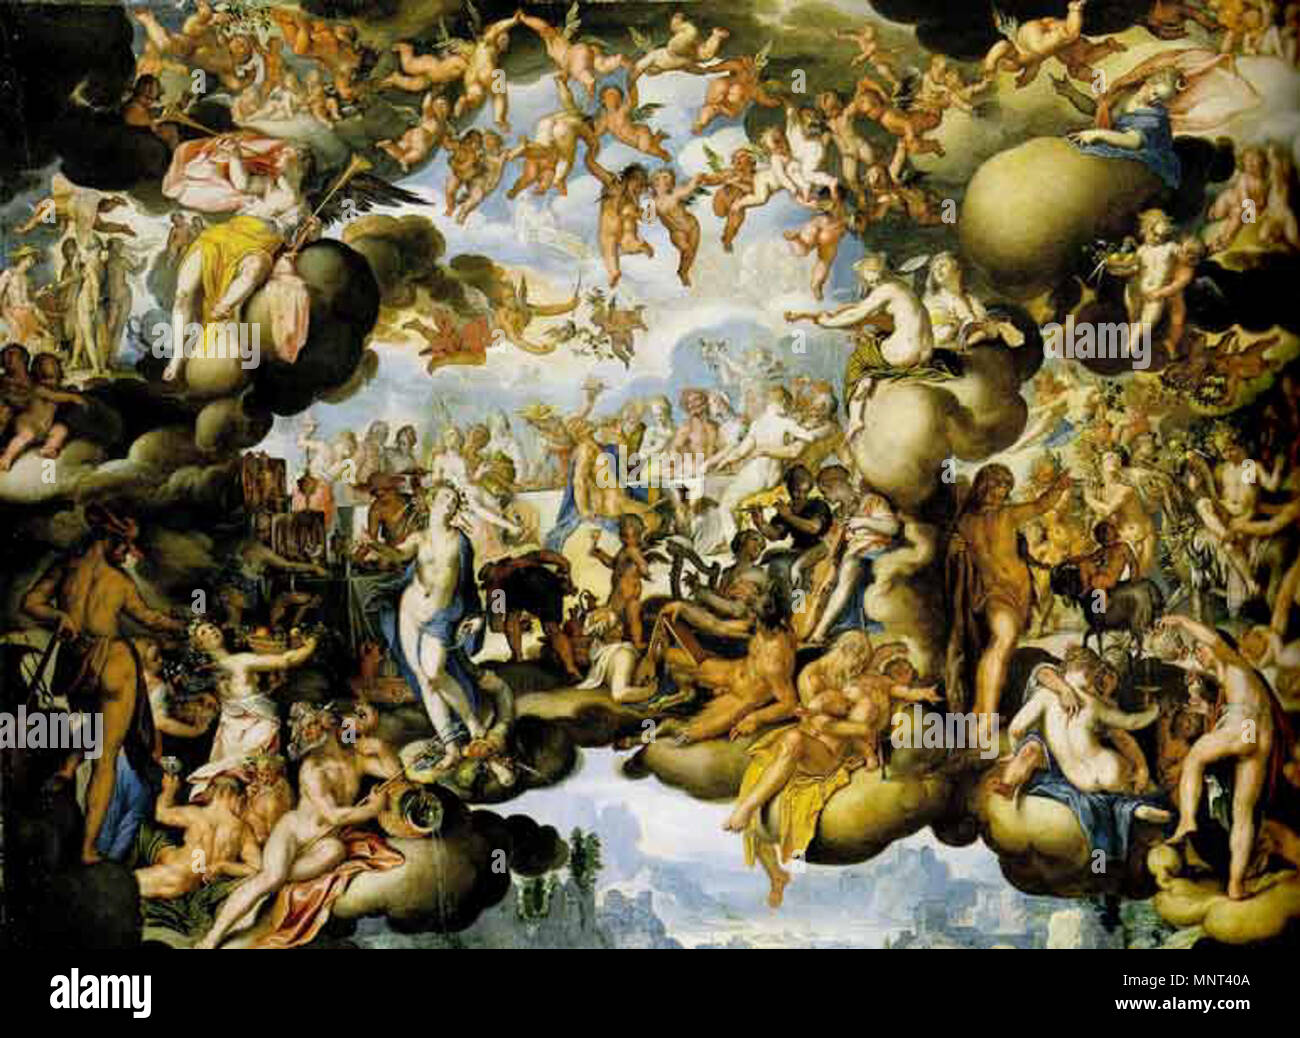 . English: Wedding of Peleus and Thetis, Joachim Wtewael (1566 - 1638), 1602 Oil on copper, Herzog Anton Ulrich-Museum, Braunschweig. Adapted from an engraving by Hendrik Goltzius. 1602.   Joachim Wtewael  (1566–1638)     Alternative names Joachim Uytewael, Joachim Uyttewael, Joachim Wtenwael, Joachim Antonisz. Wtewael, Joachim Wttewael, Joachim Tonisz. Wttewaal  Description Dutch painter and draughtsman  Date of birth/death 1566 1 August 1638  Location of birth/death Utrecht Utrecht  Work location Padua (1586-1590), France (1590-1592), Utrecht (1592-1638)  Authority control  : Q541644 VIAF: 6 Stock Photo